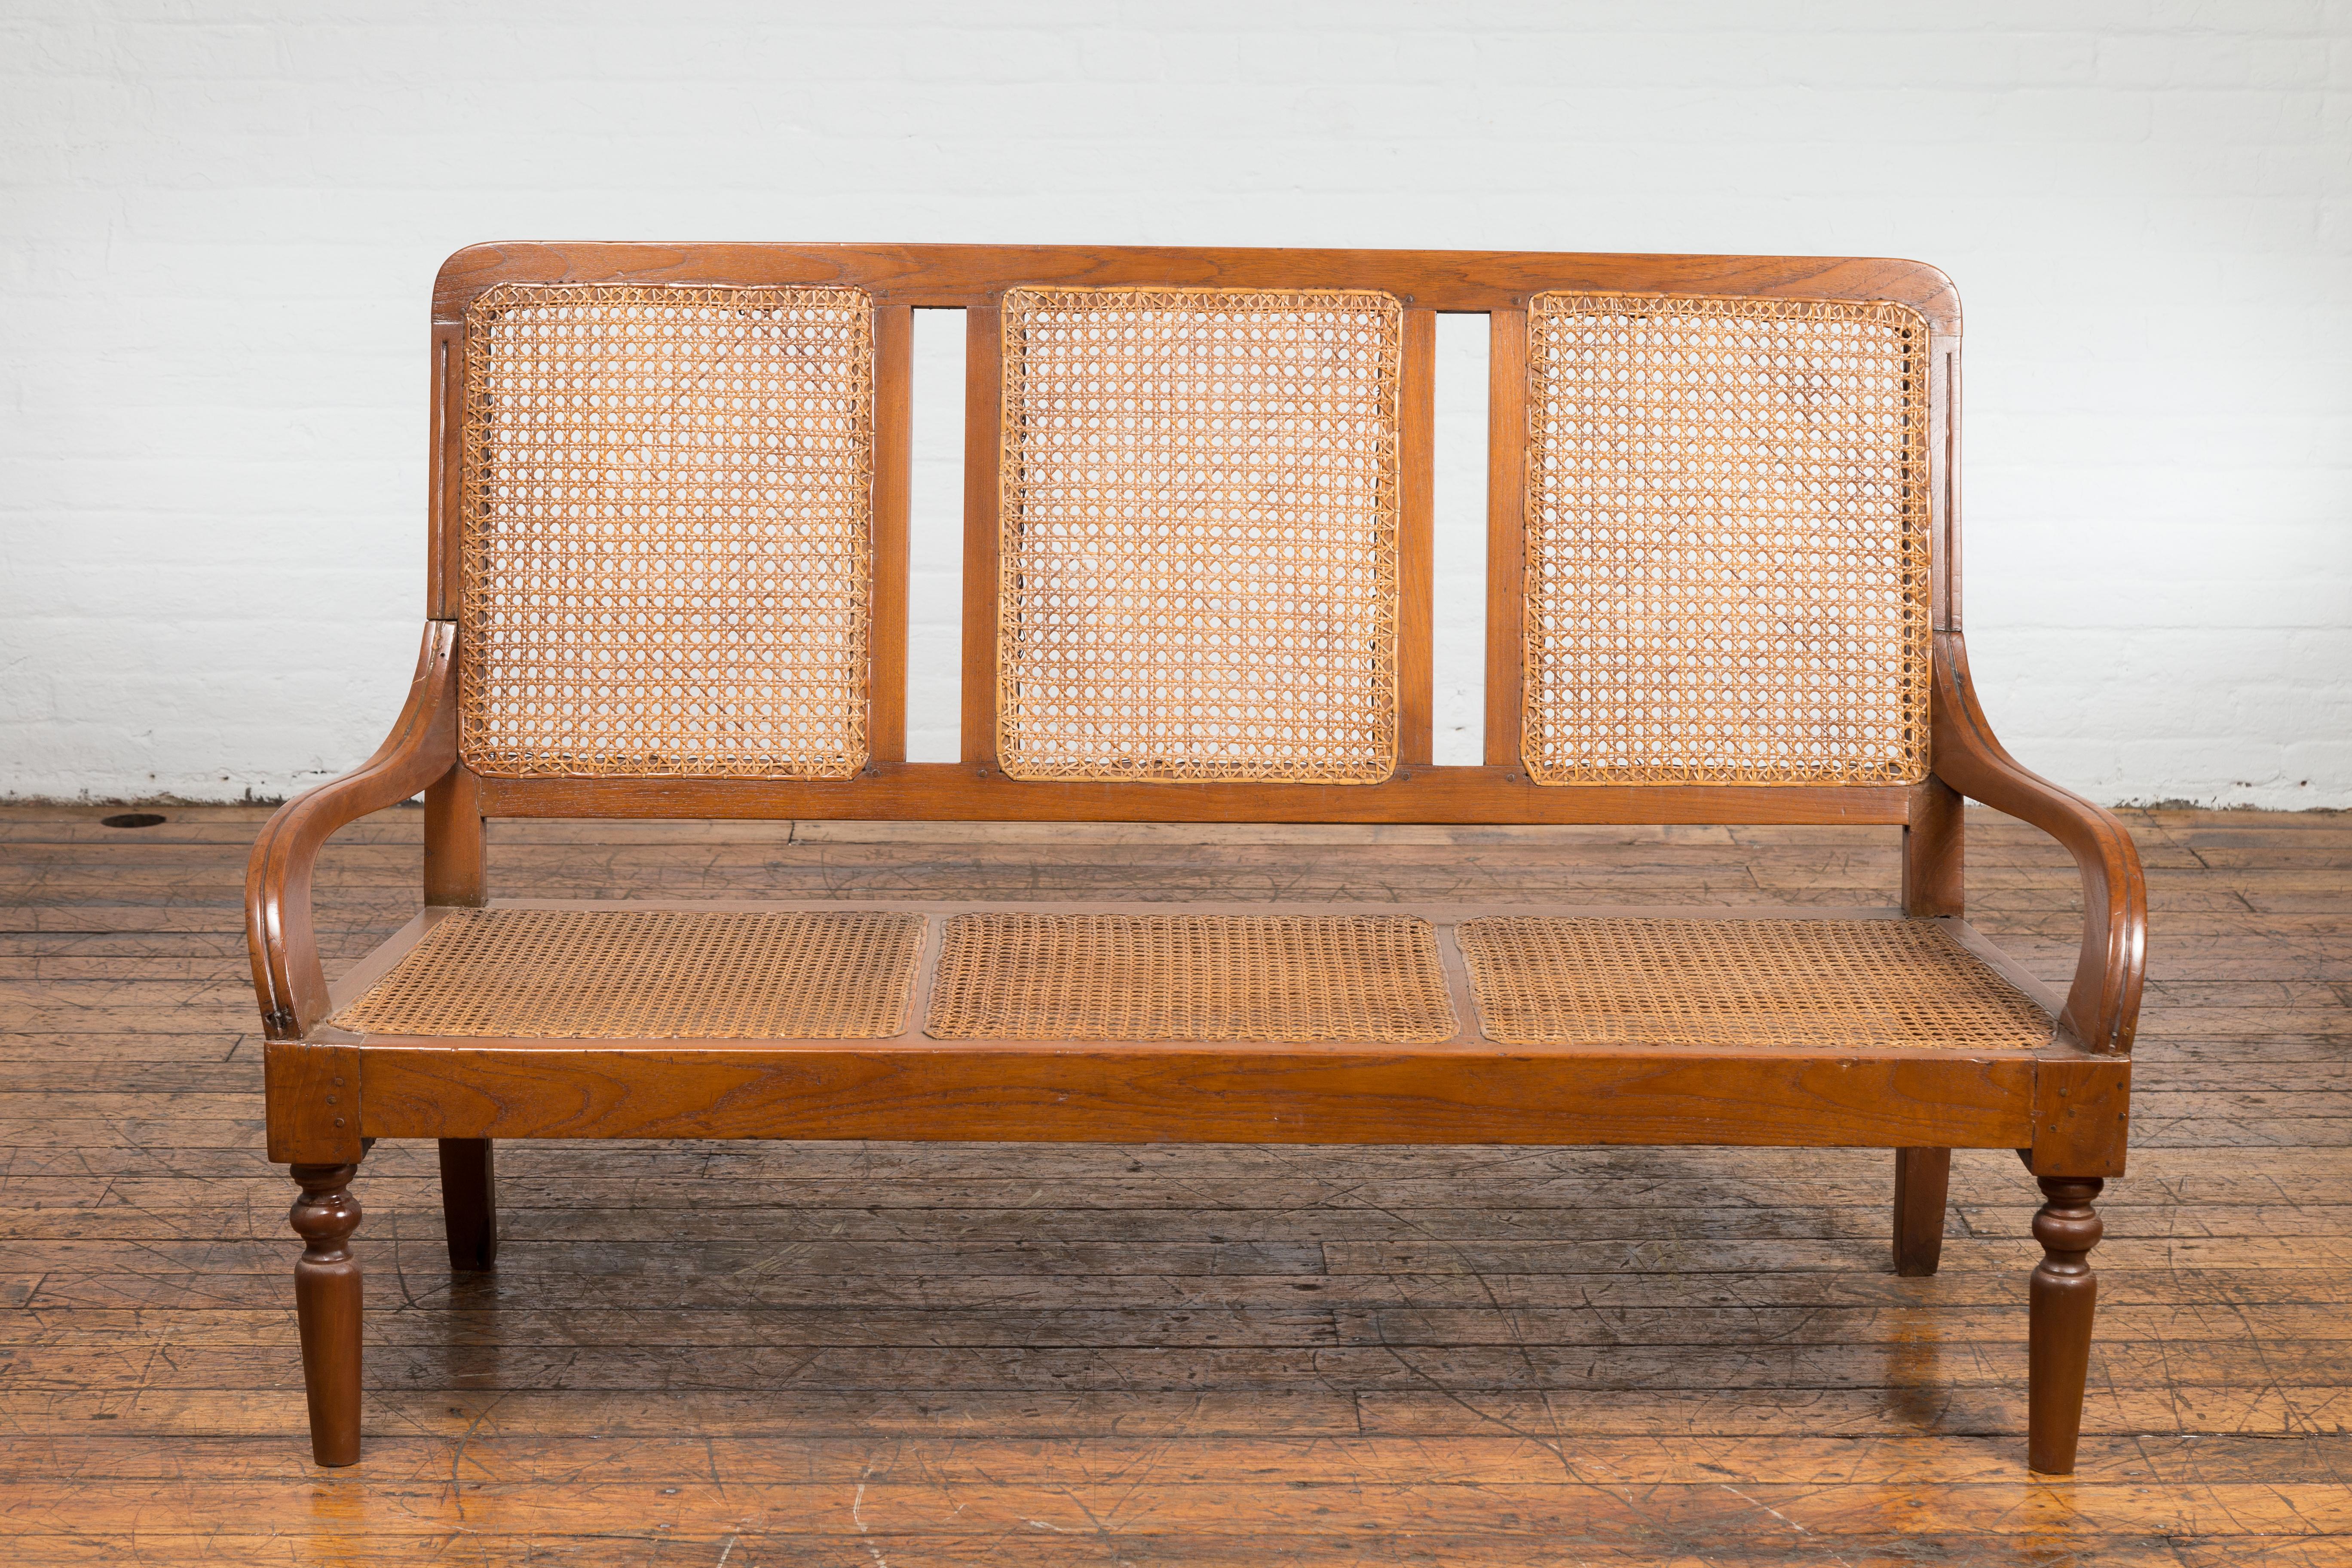 A rustic Javanese teak wood three-seat settee from the Turn of the Century with inset woven rattan seat and back. Infusing an air of rustic charm and understated elegance, this Javanese teak wood three-seat settee, hailing from the Turn of the